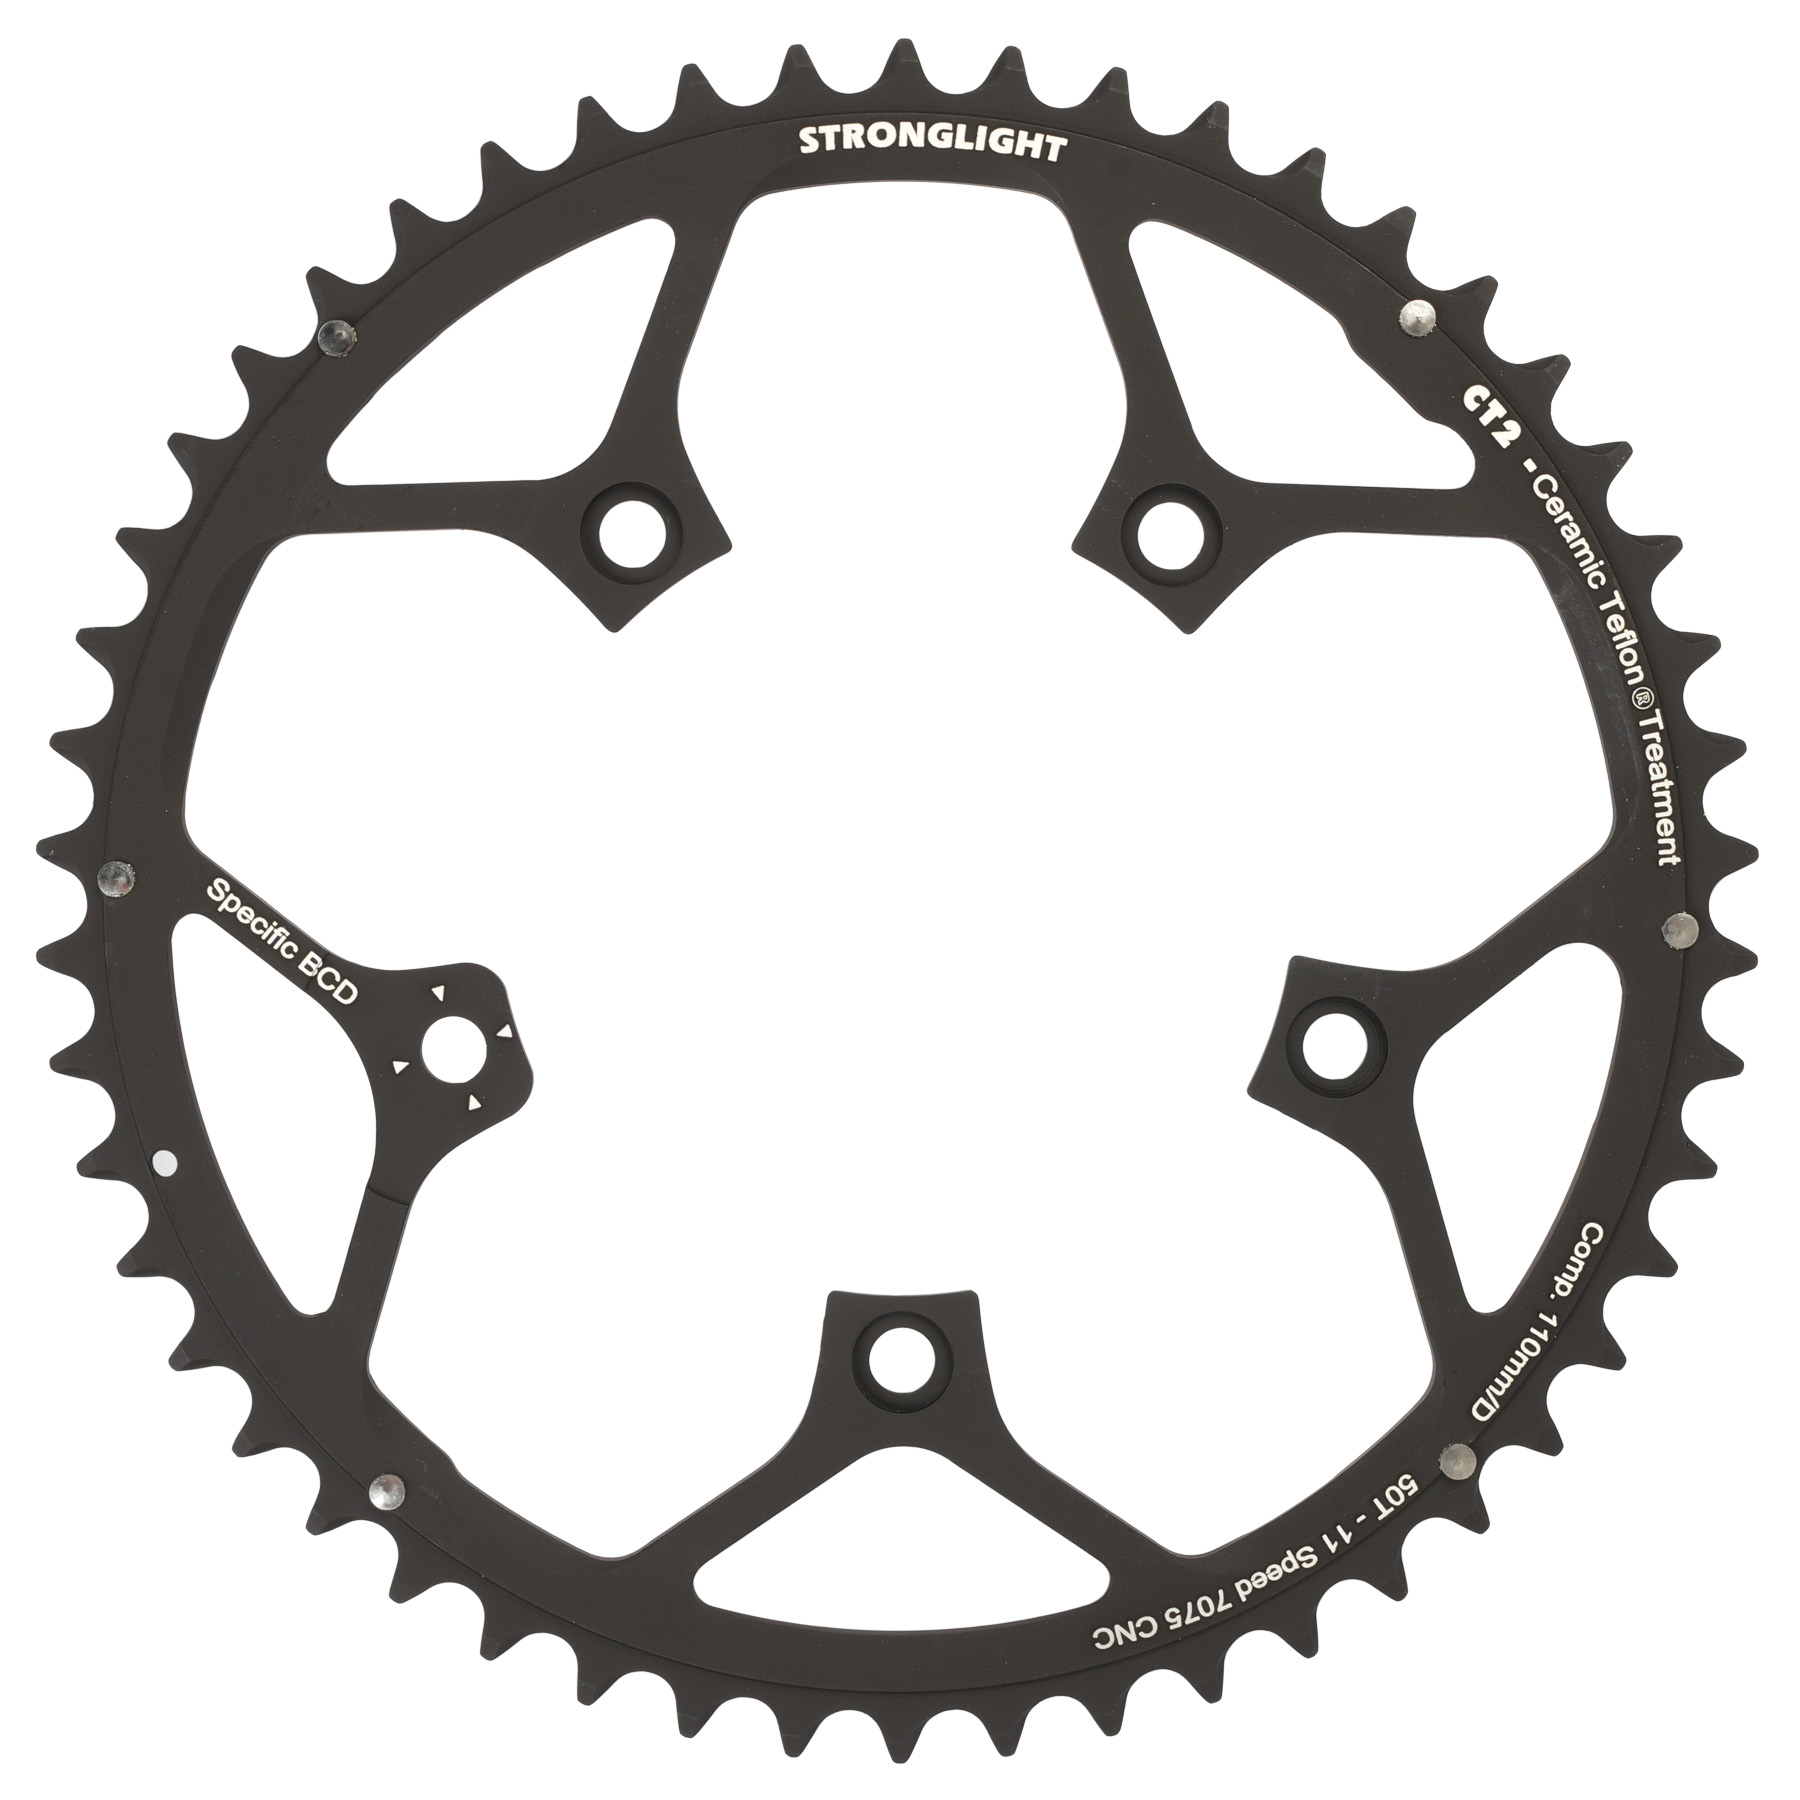 Productfoto van Stronglight CT2 Road Chainring - 5-Arm - 110mm - Type D - Campagnolo 11-Speed